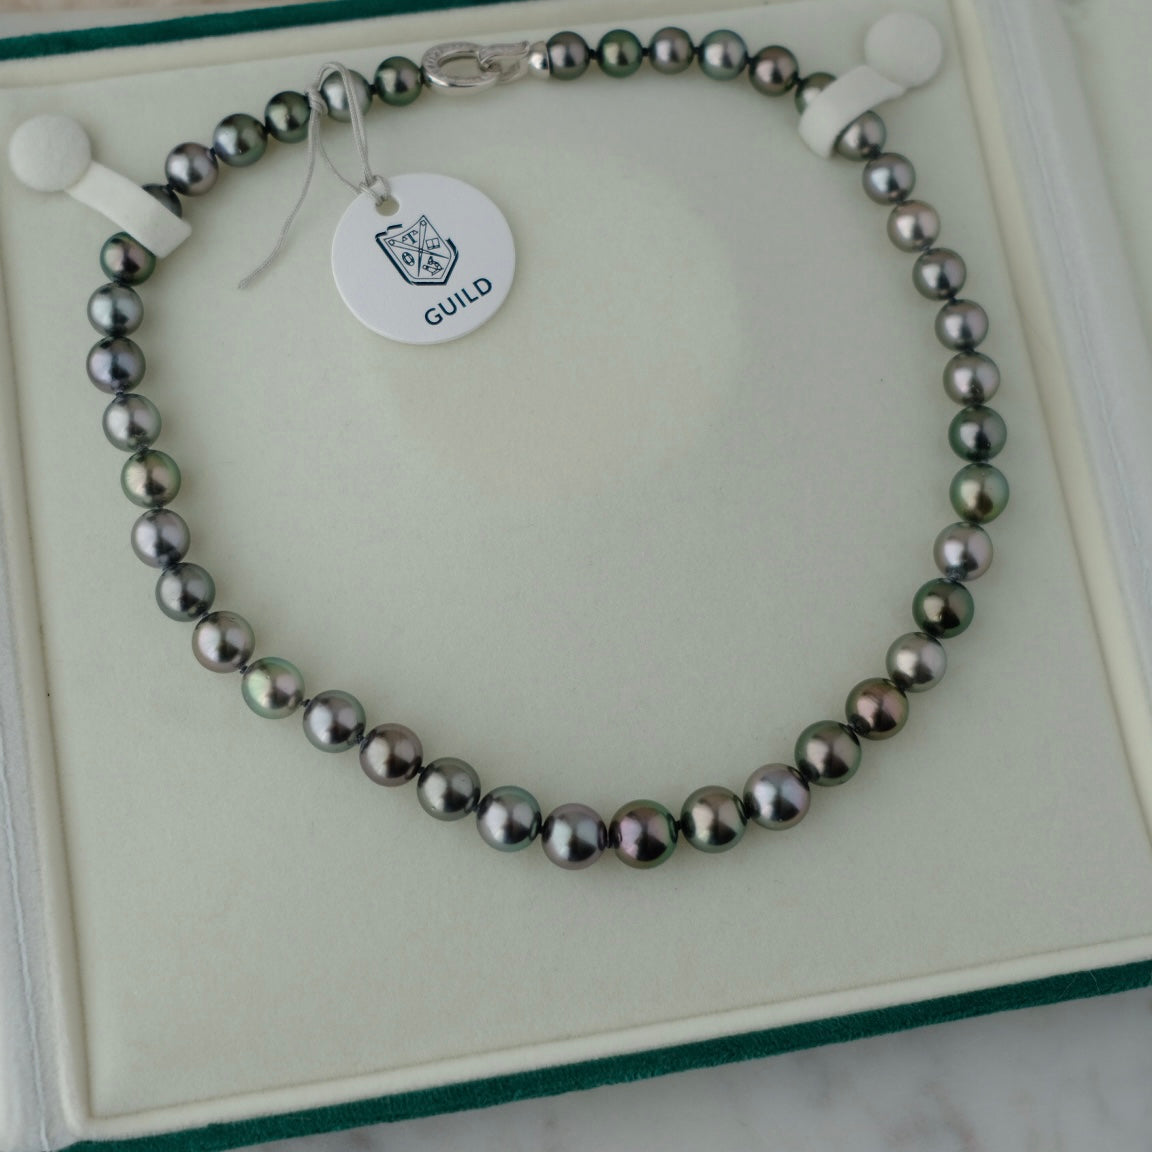 Tahitian Starla Necklace, 8.4-11.0mm, Pearl Necklace, GUILD Certificate